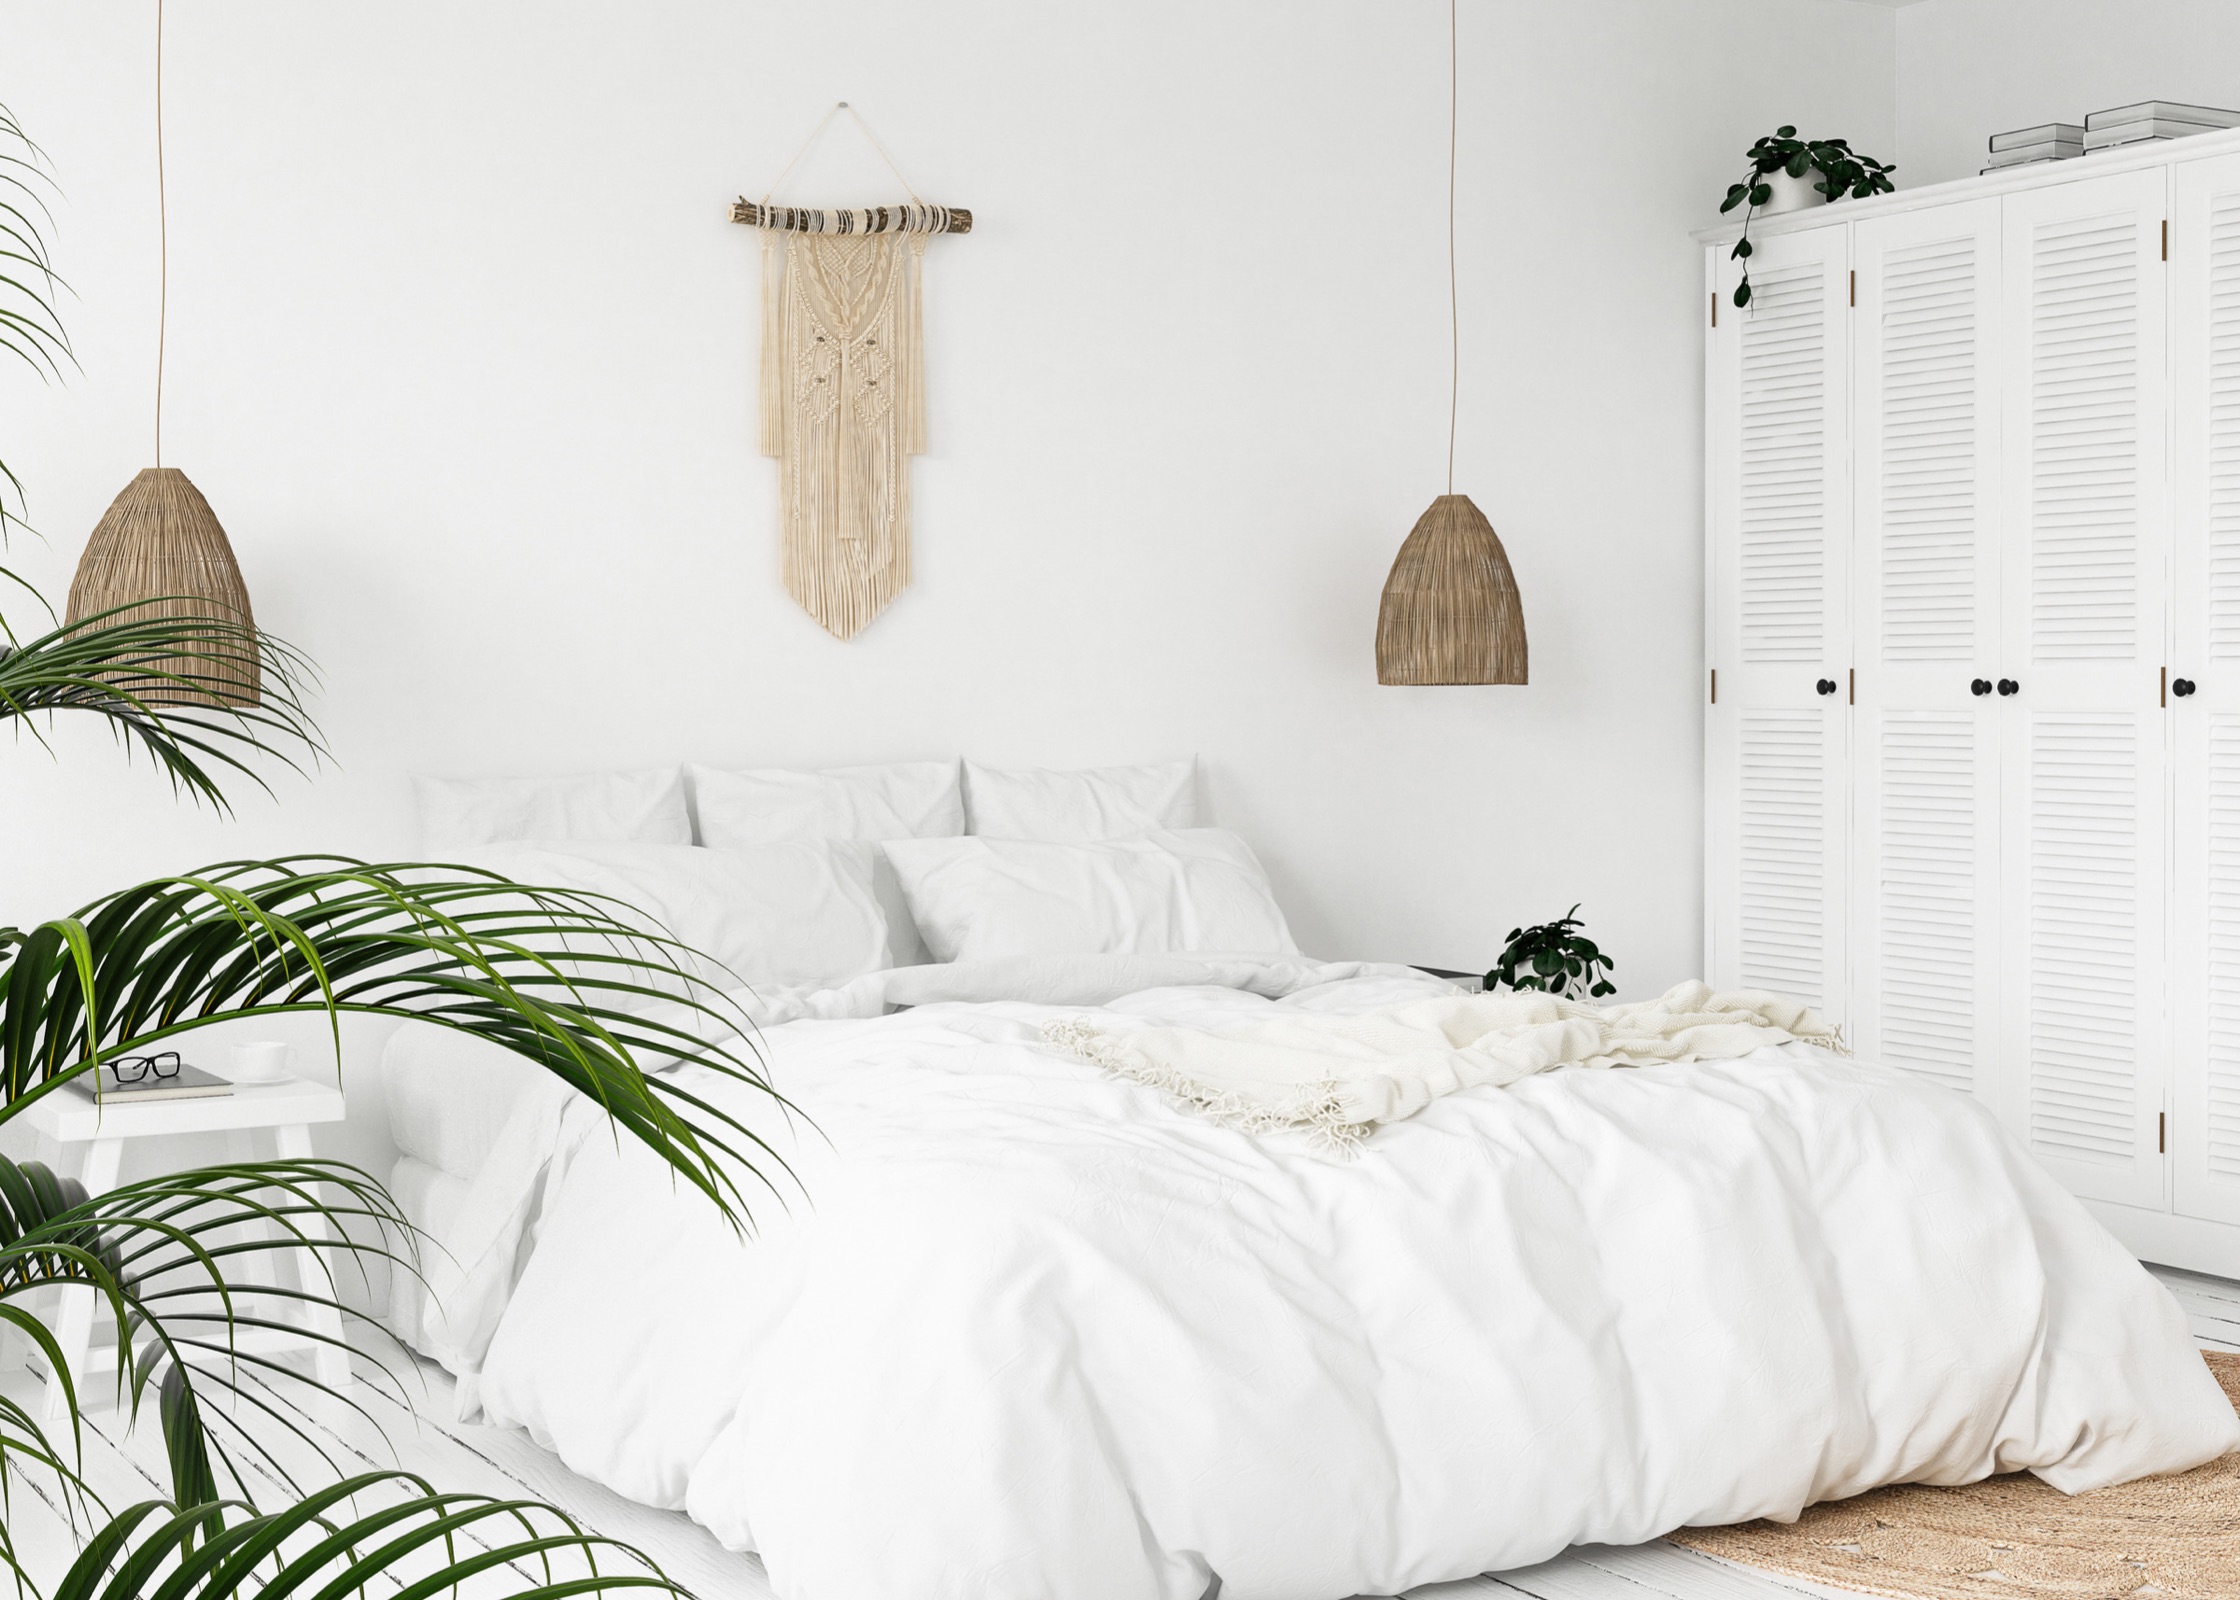 beautiful clean and minimalistic bedding. Spring decor ideas. decorating for spring. decor for spring. How to update your home for spring. resfresh home. get home spring ready. how to transition your home from winter to spring